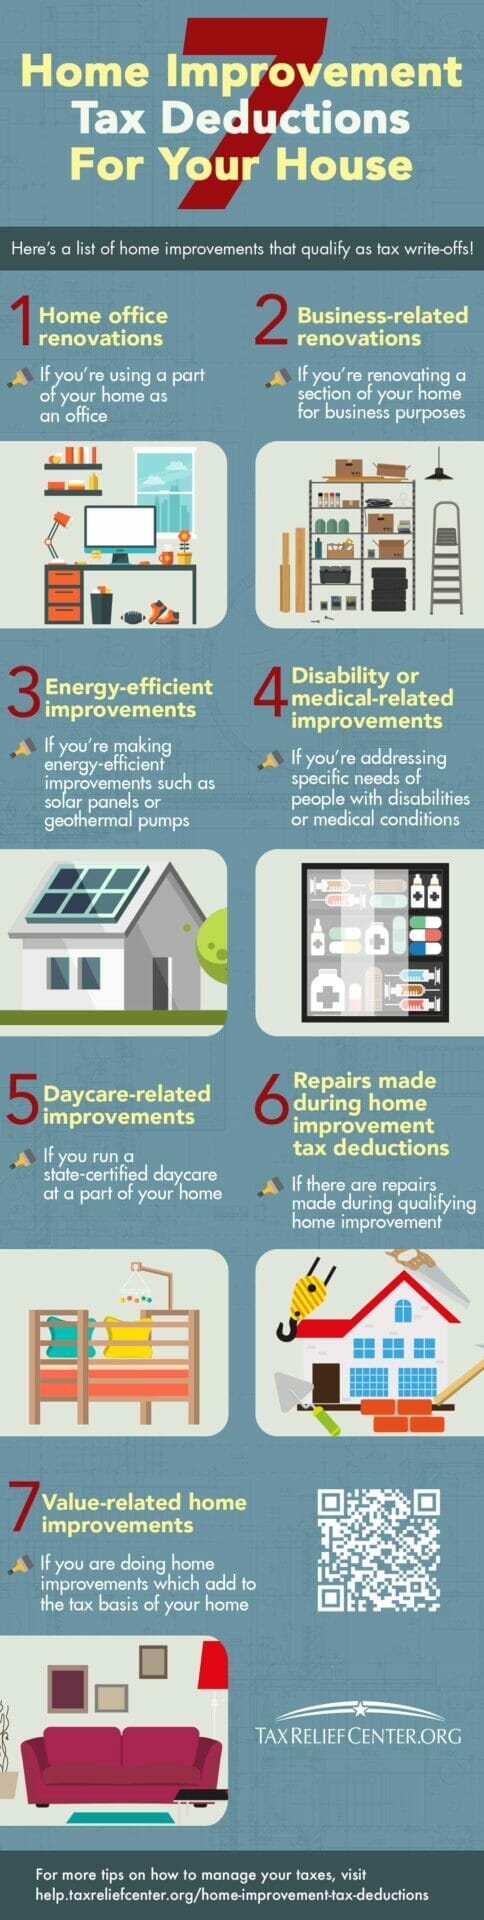 7 Home Improvement Tax Deductions for Your House [INFOGRAPHIC] | https://help.taxreliefcenter.org/home-improvement-tax-deductions/